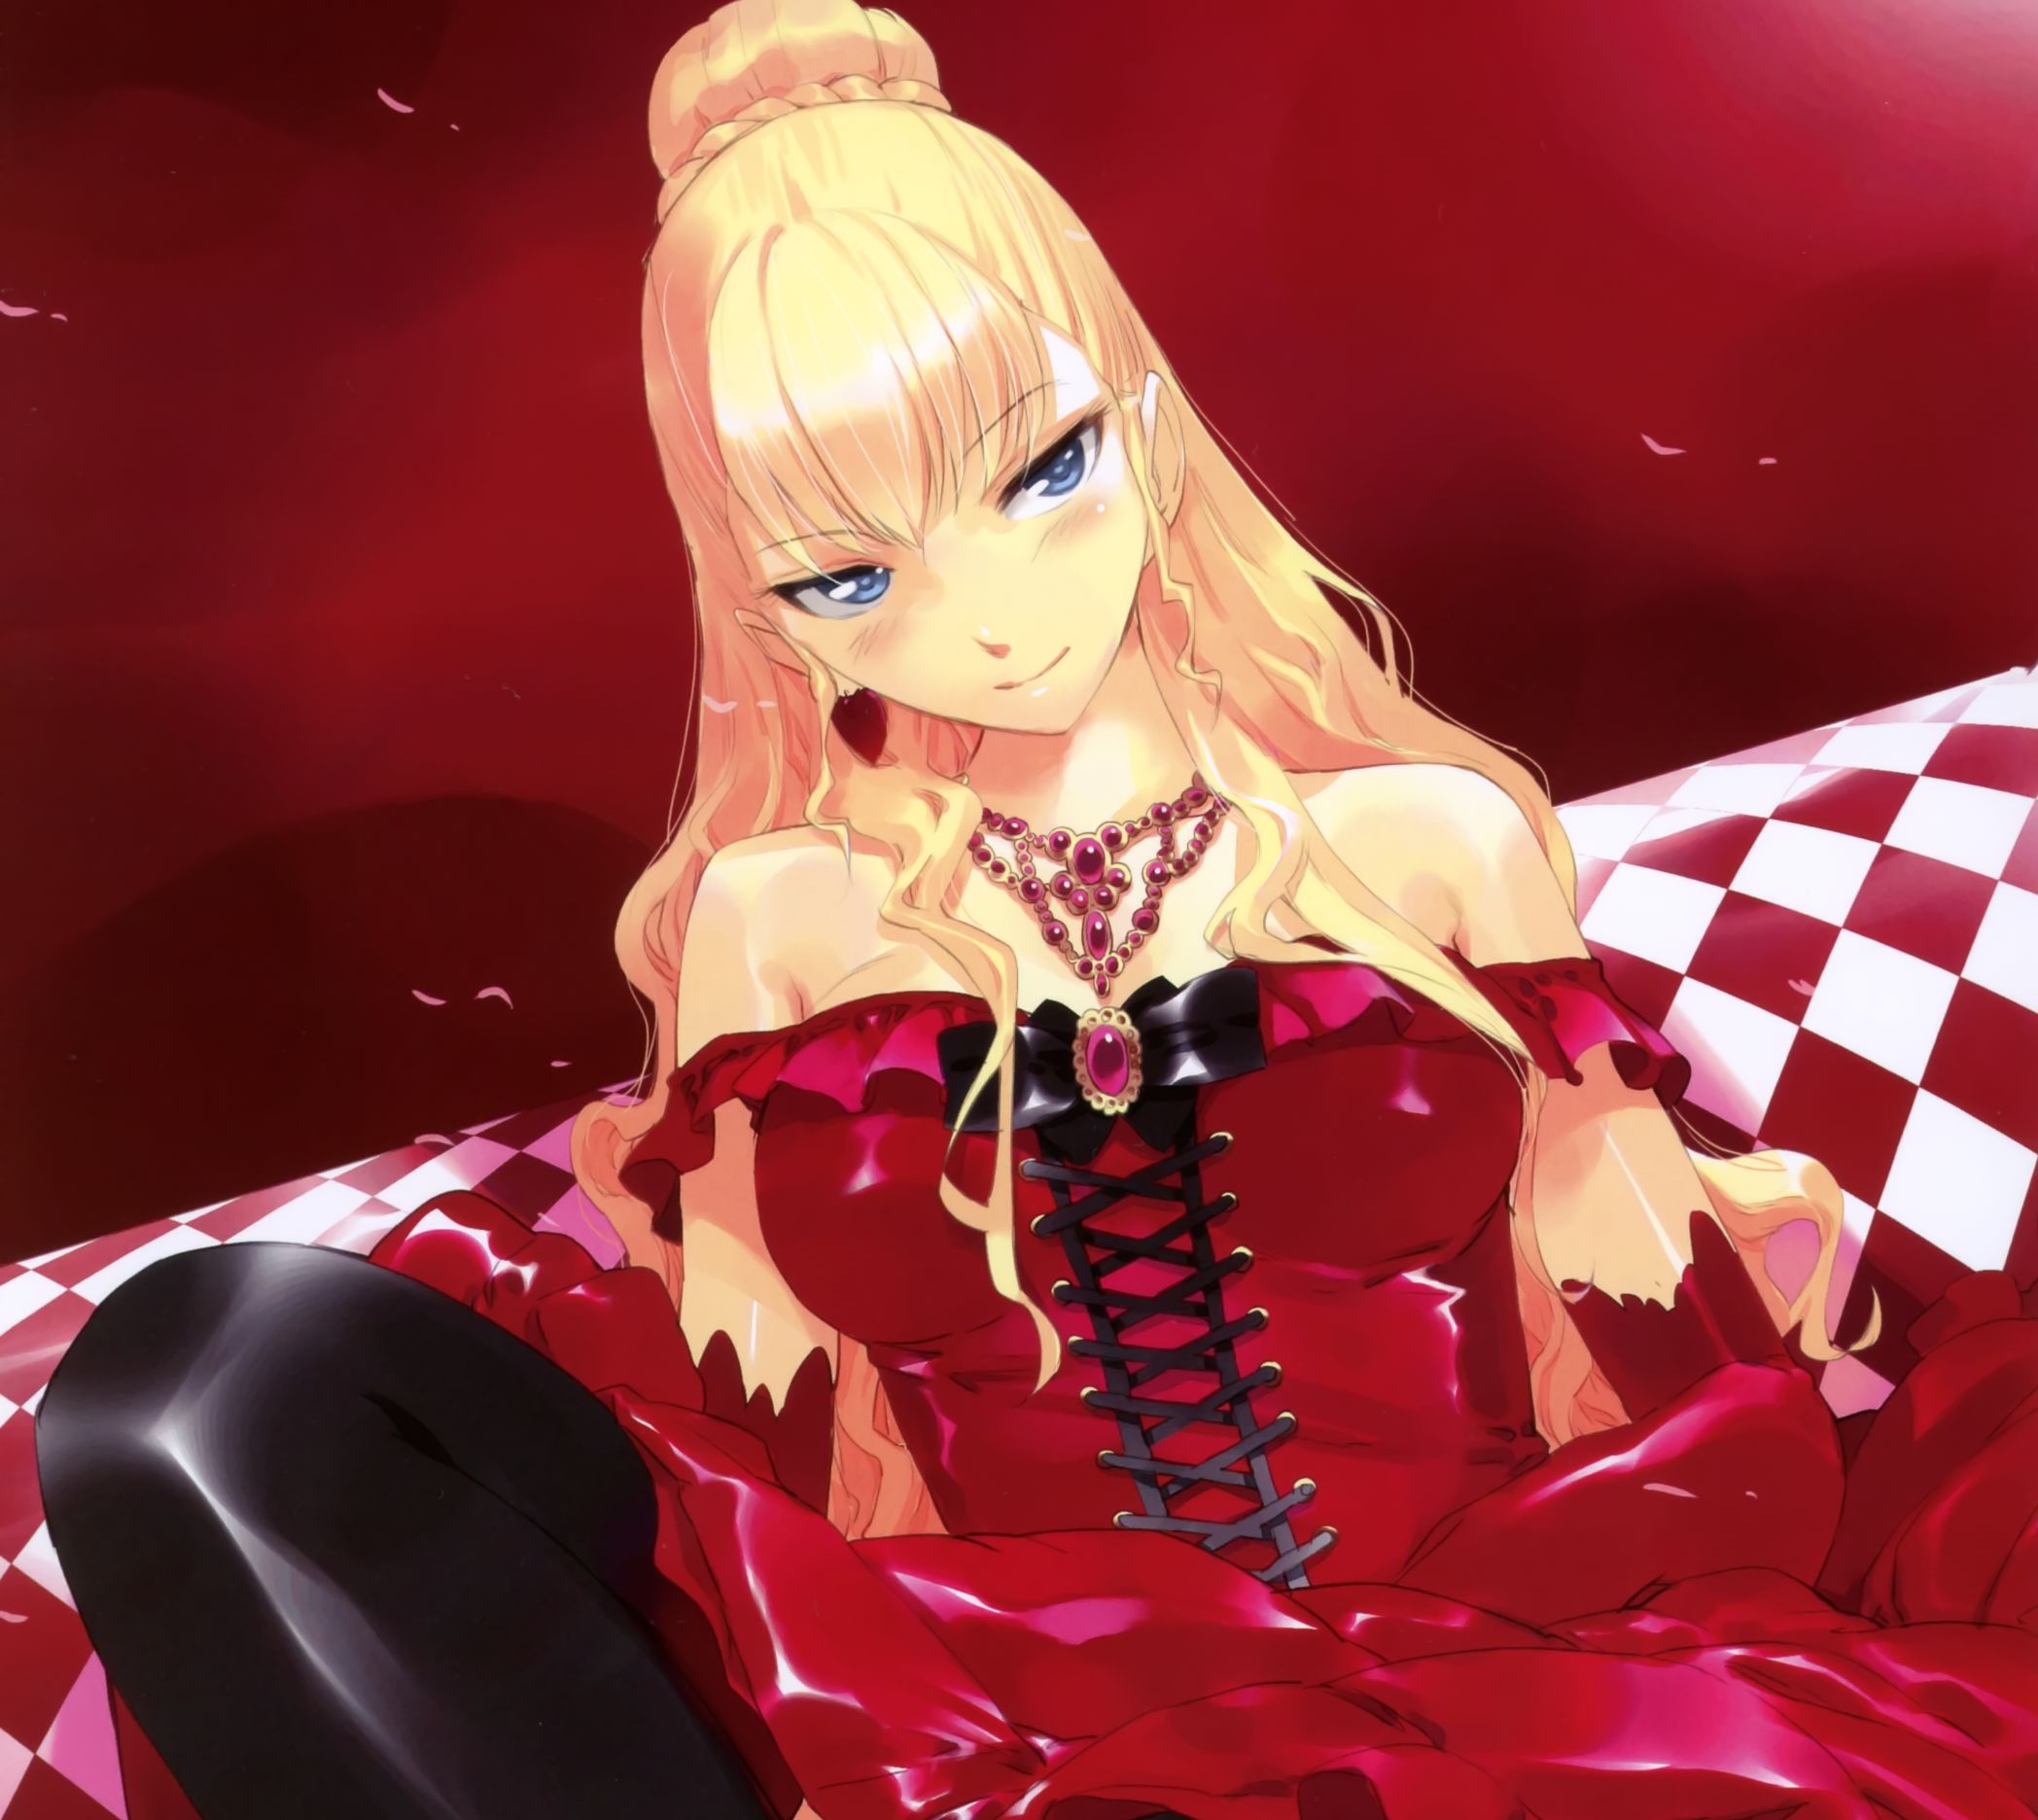 Queen of Hearts  クイーンオブハート  Song Lyrics and Music by Kanon69 ft  Megurine Luka arranged by Arerie9 on Smule Social Singing app